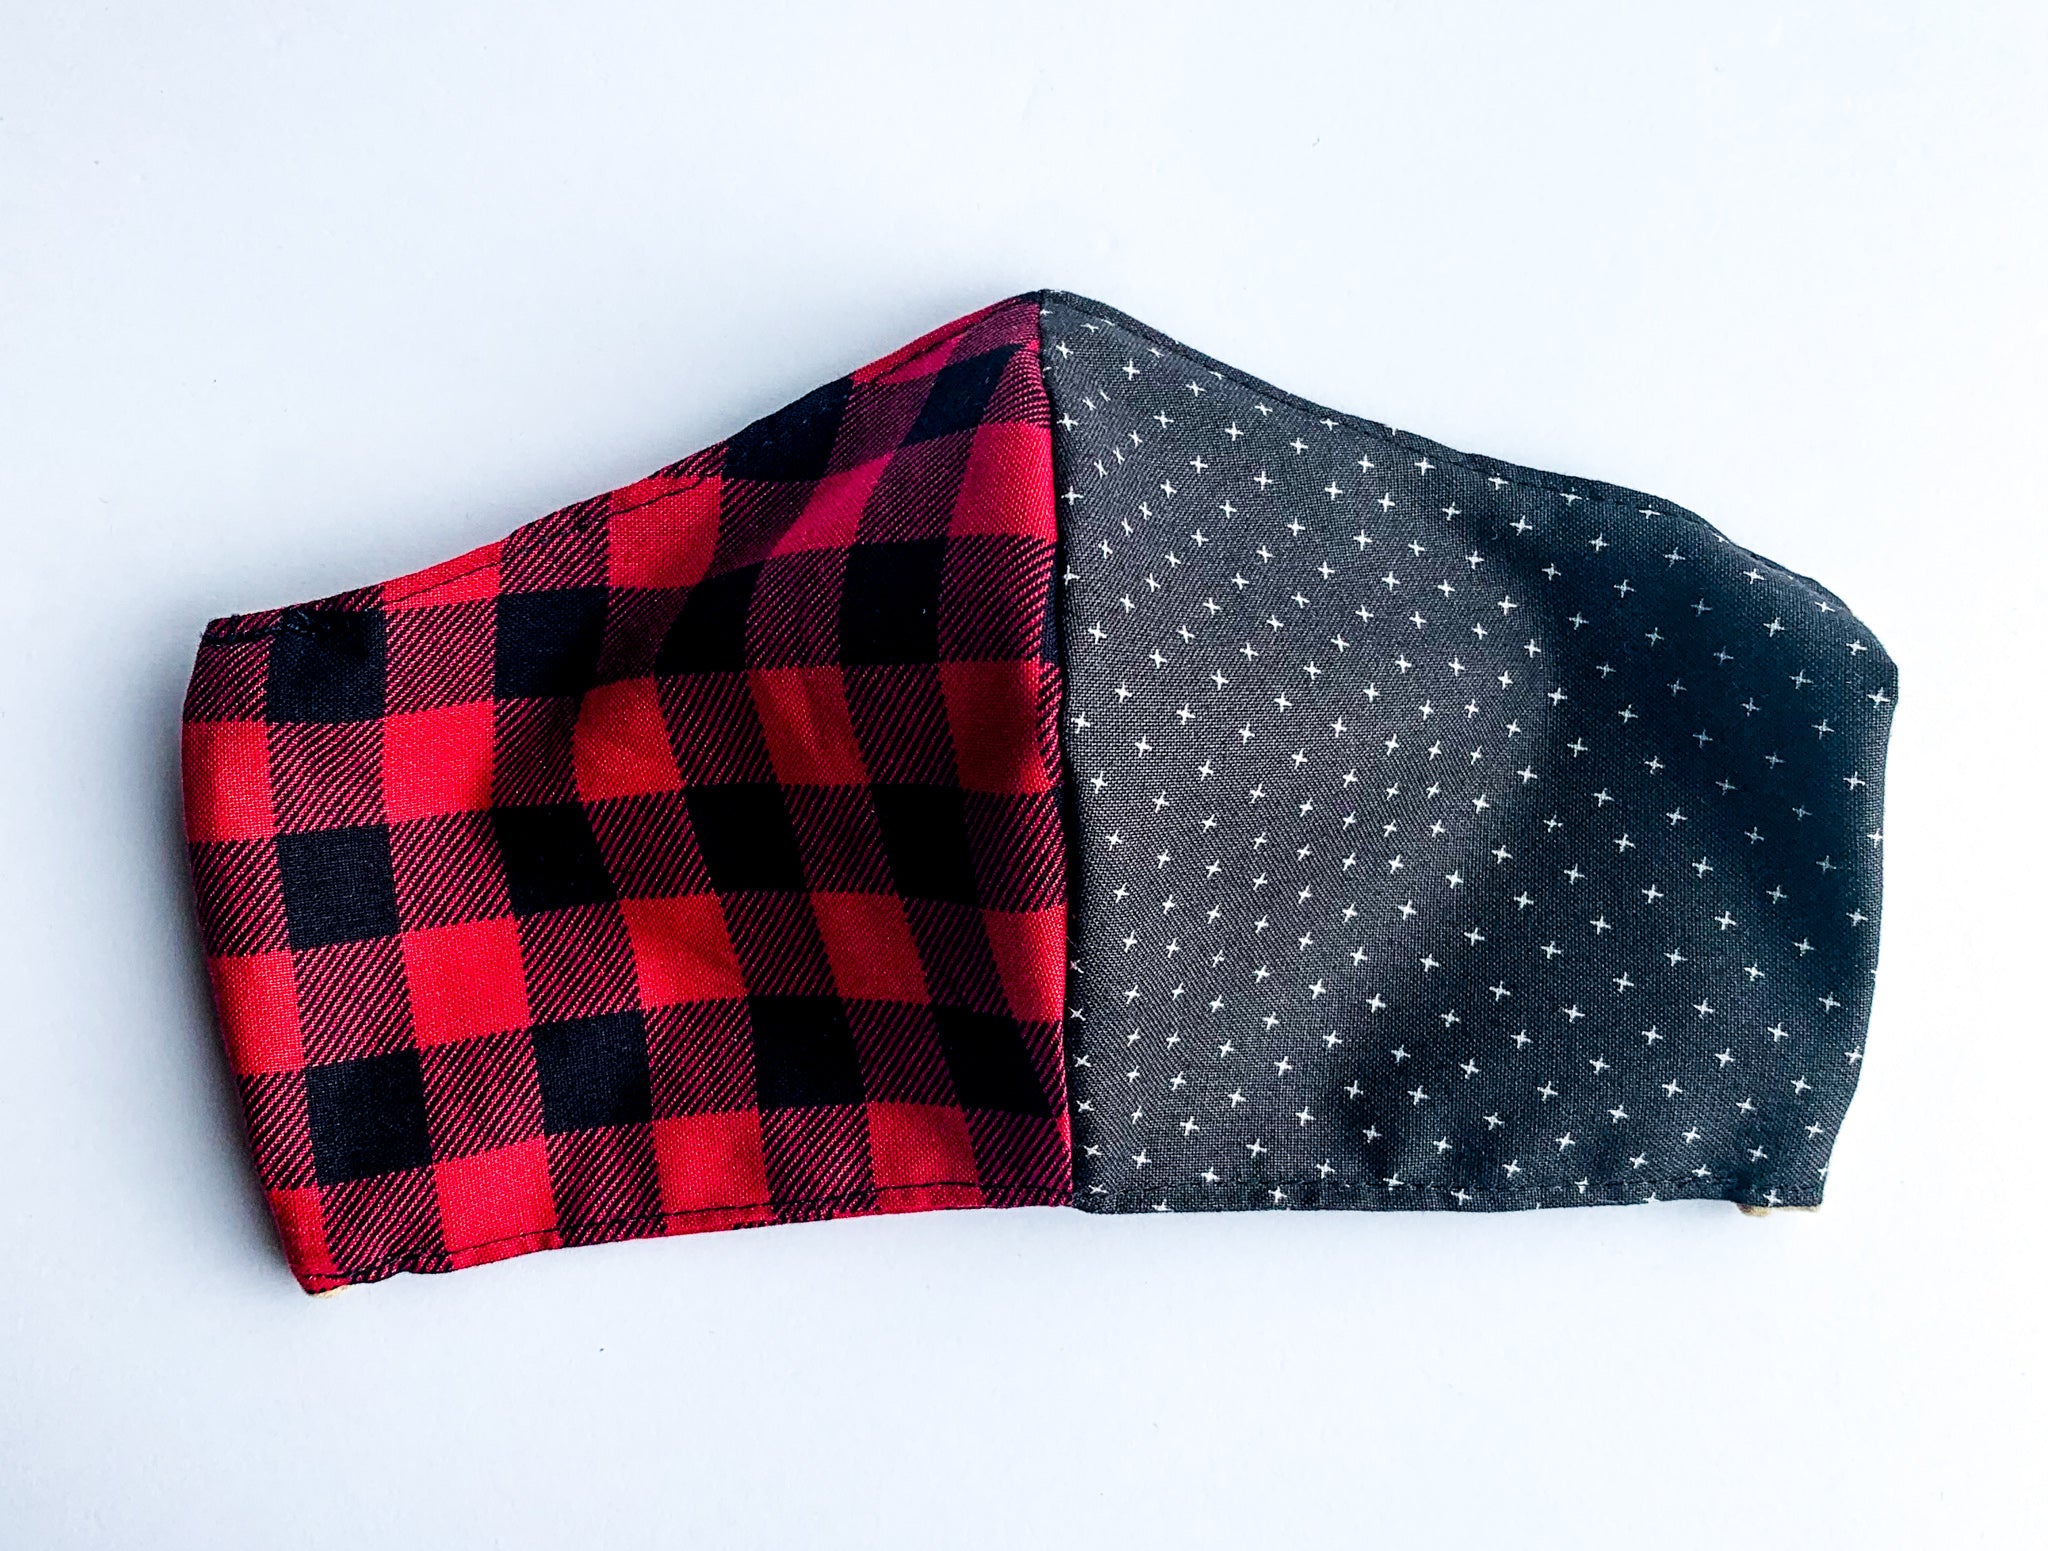 Red and Black Plaid Patchwork Face Mask